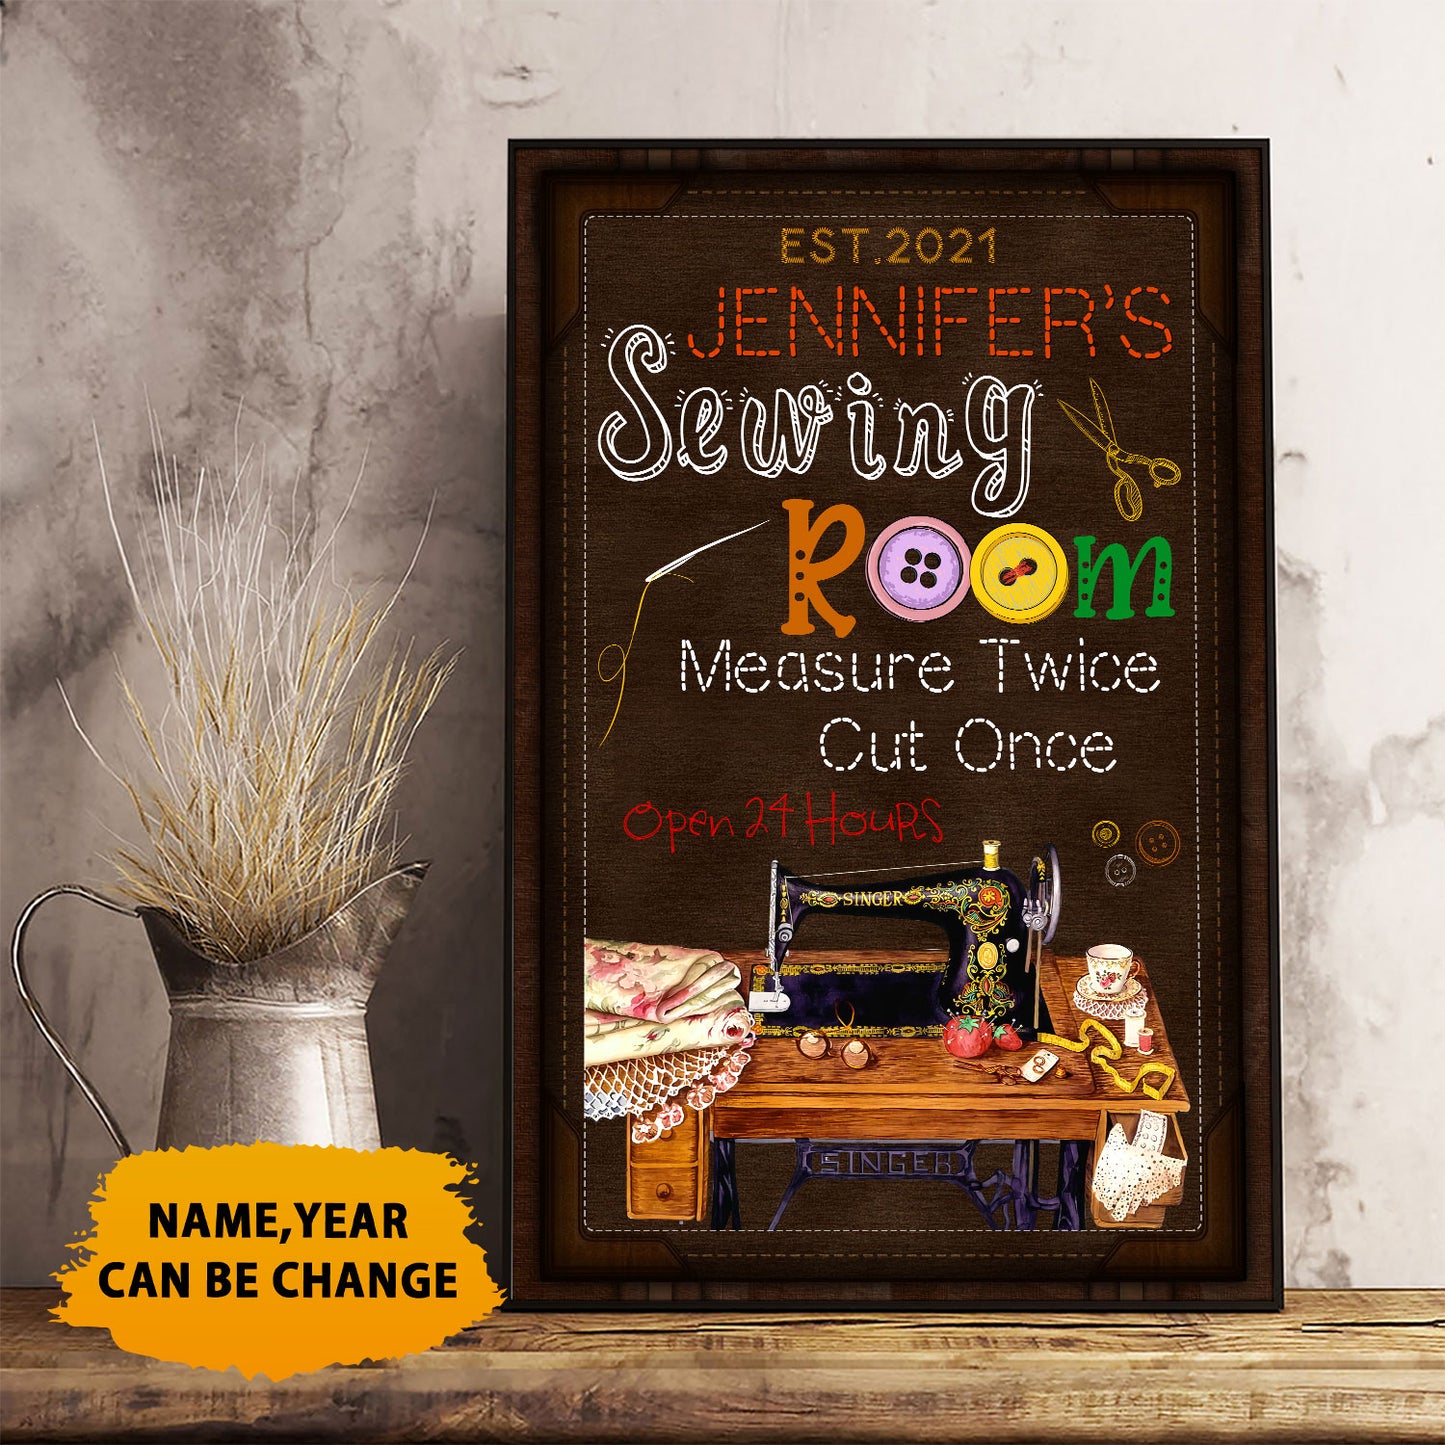 Sewing Room Measure Twice Cut Once Open 24 Hours Poster